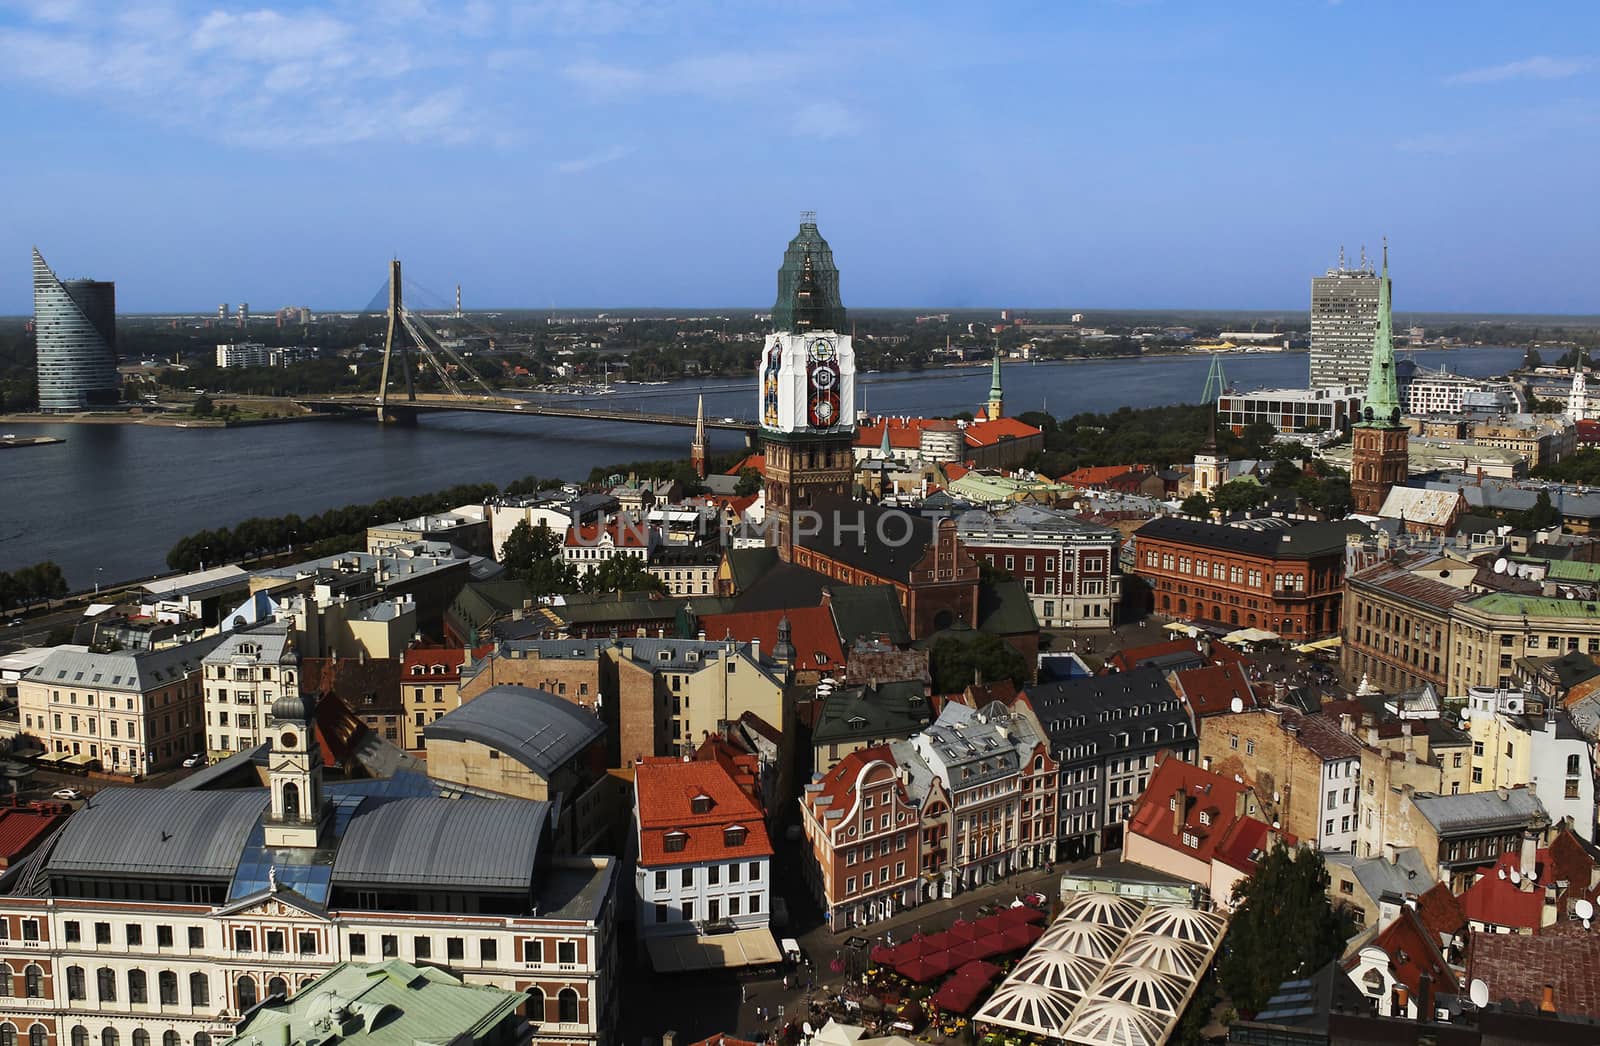 View of Old Riga by Kate17